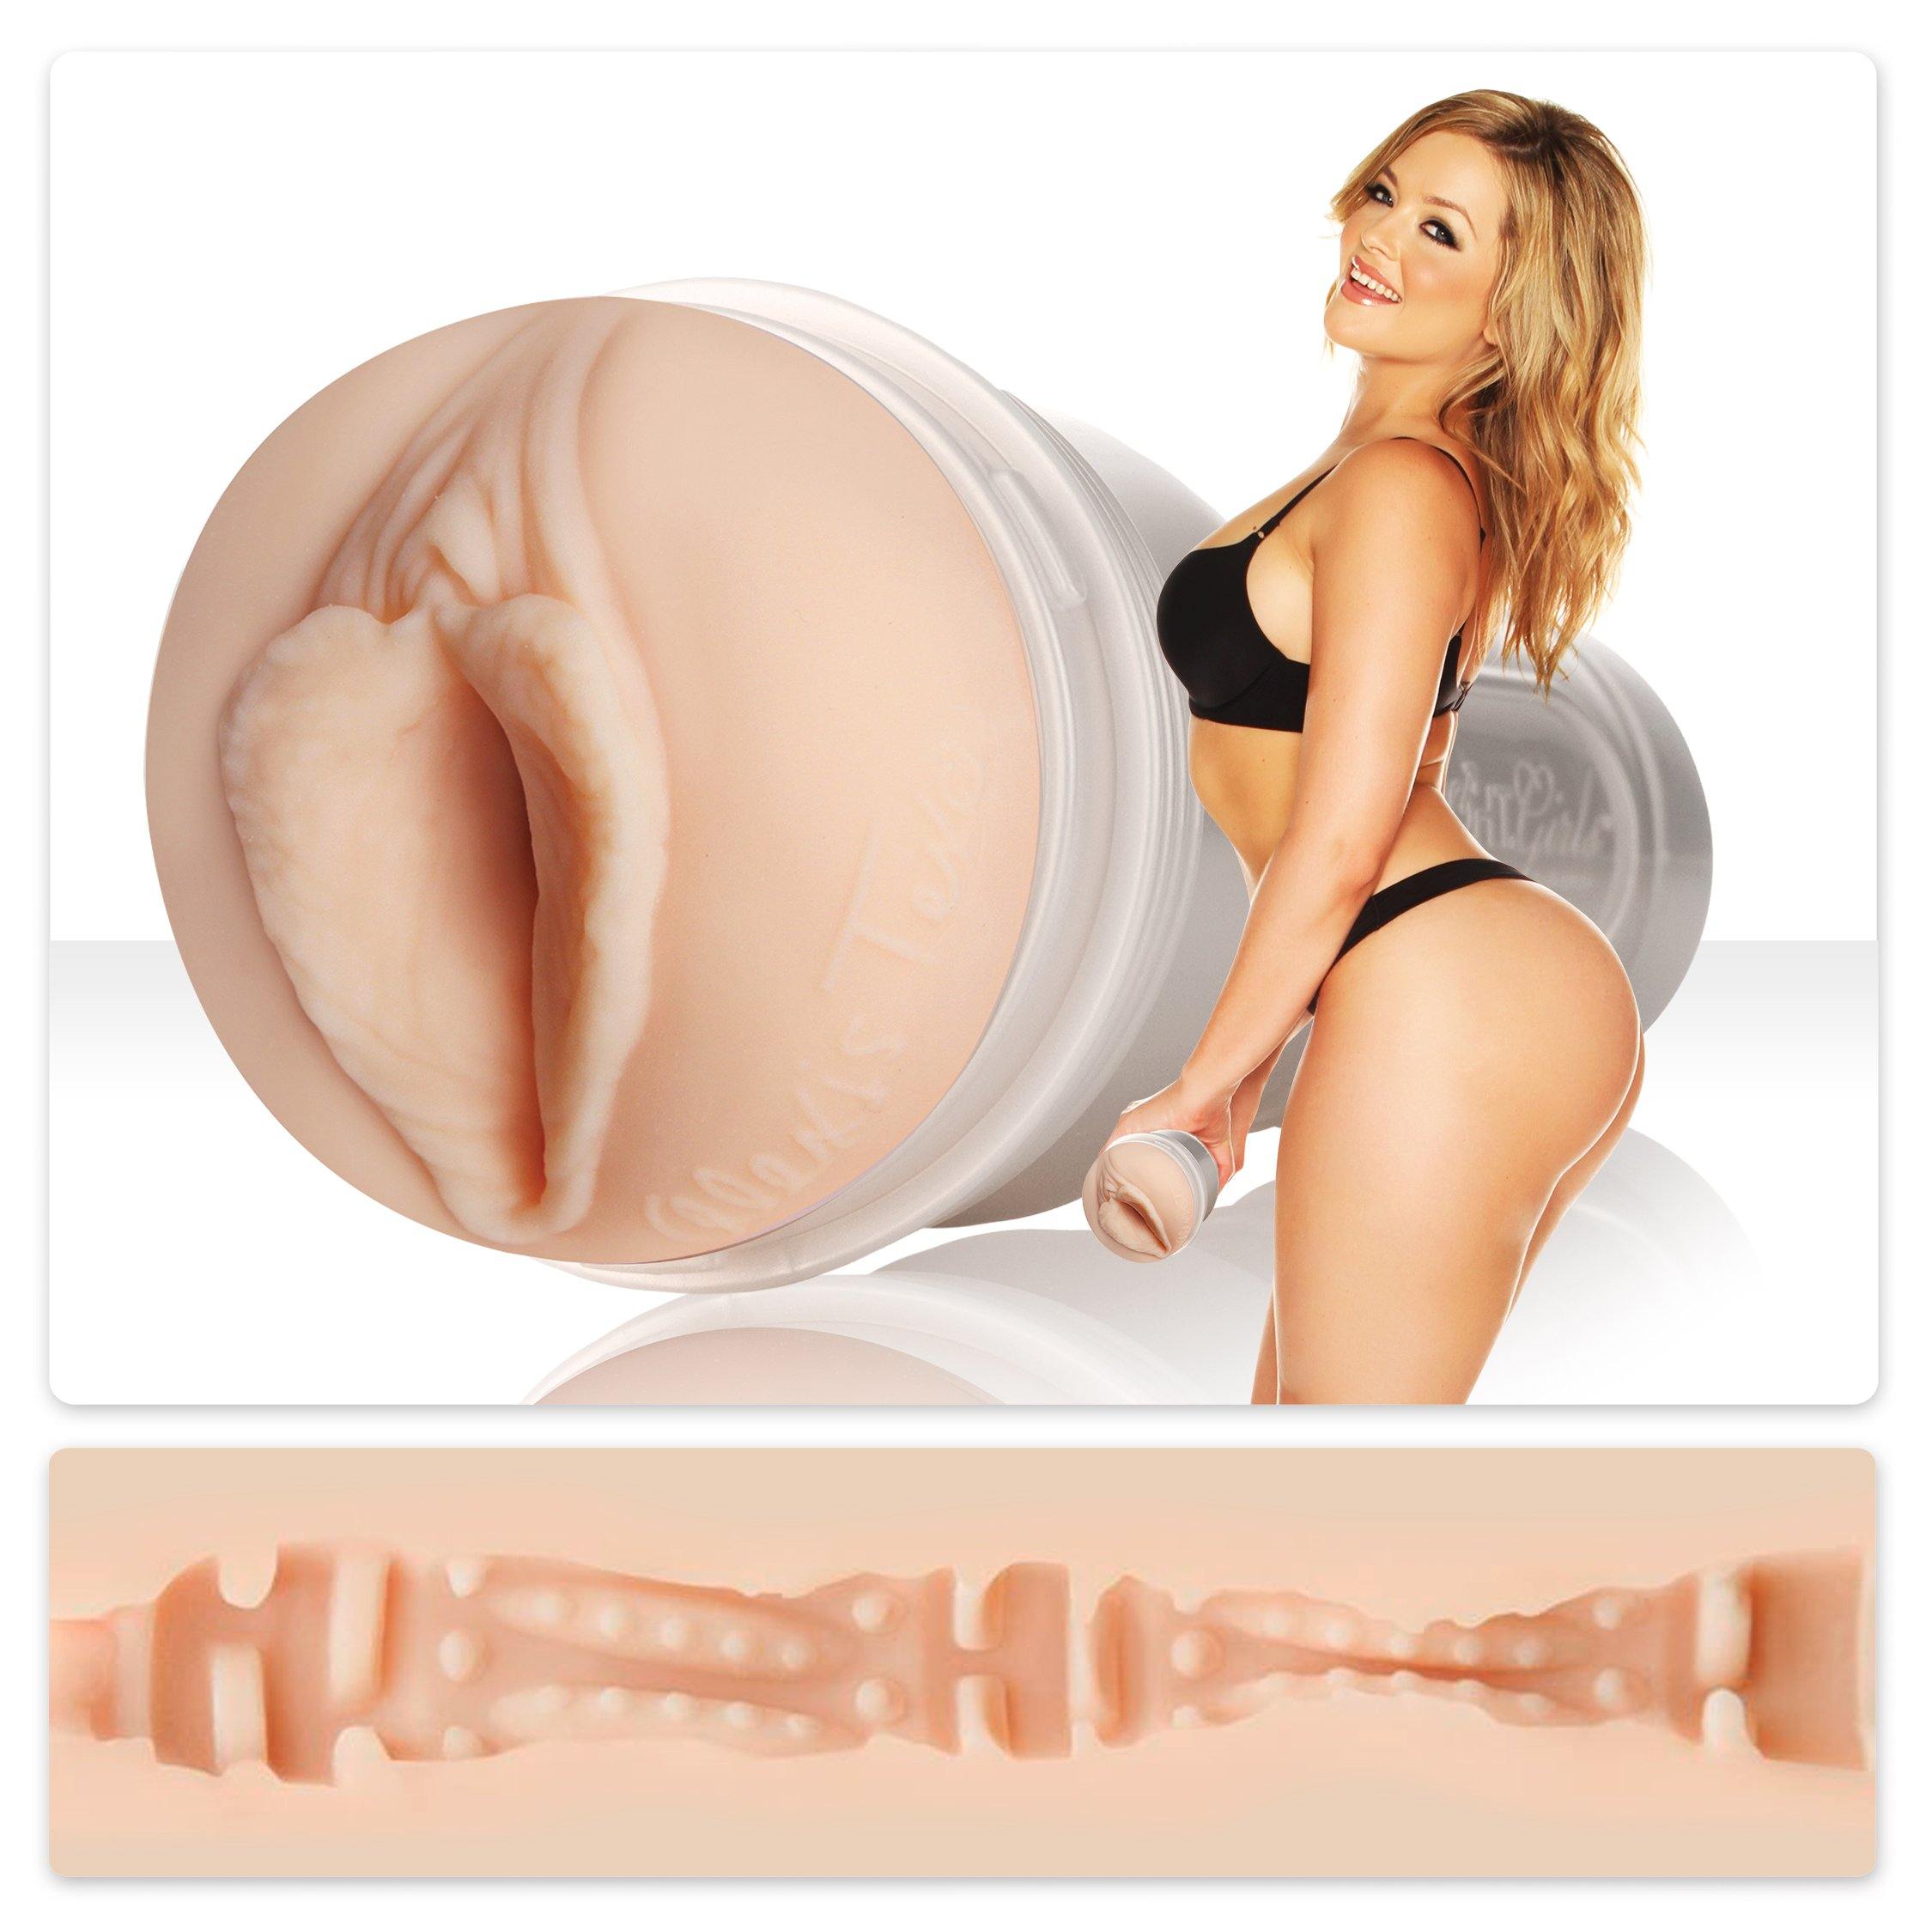 Fleshlight Girls Alexis Texas Outlaw - Buy At Luxury Toy X - Free 3-Day Shipping